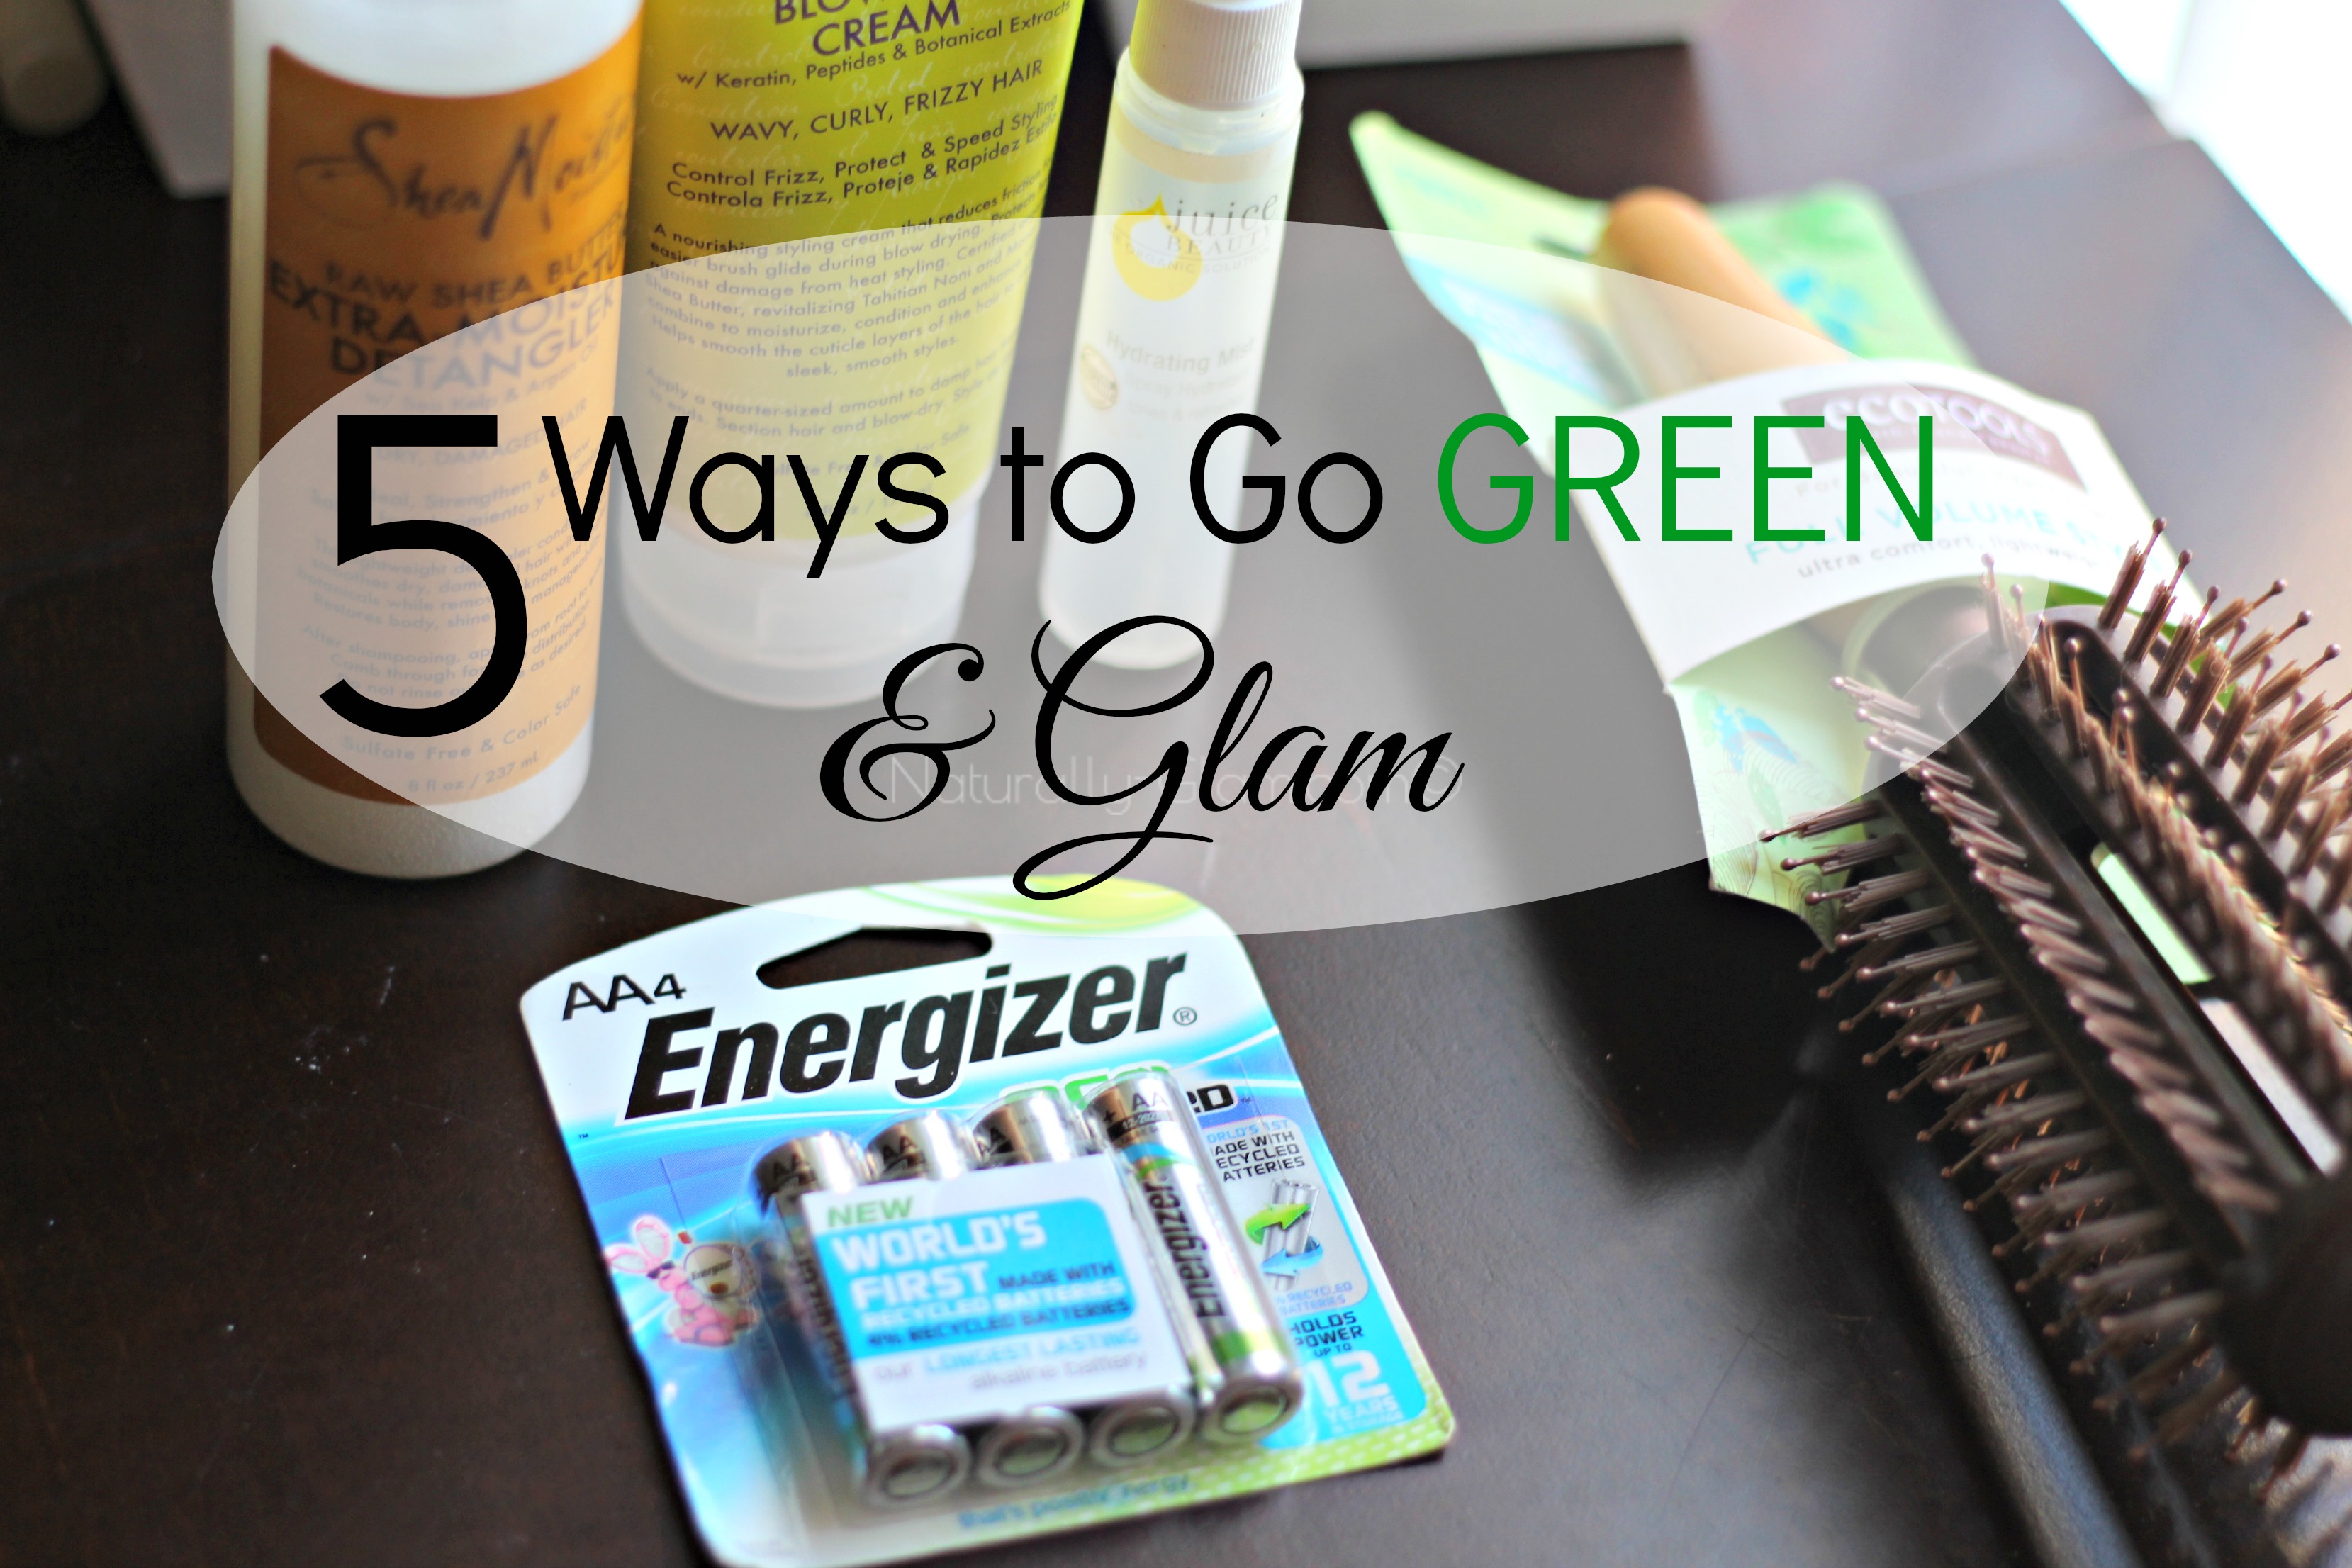 green living, energizer batteries, beauty products, eco friendly